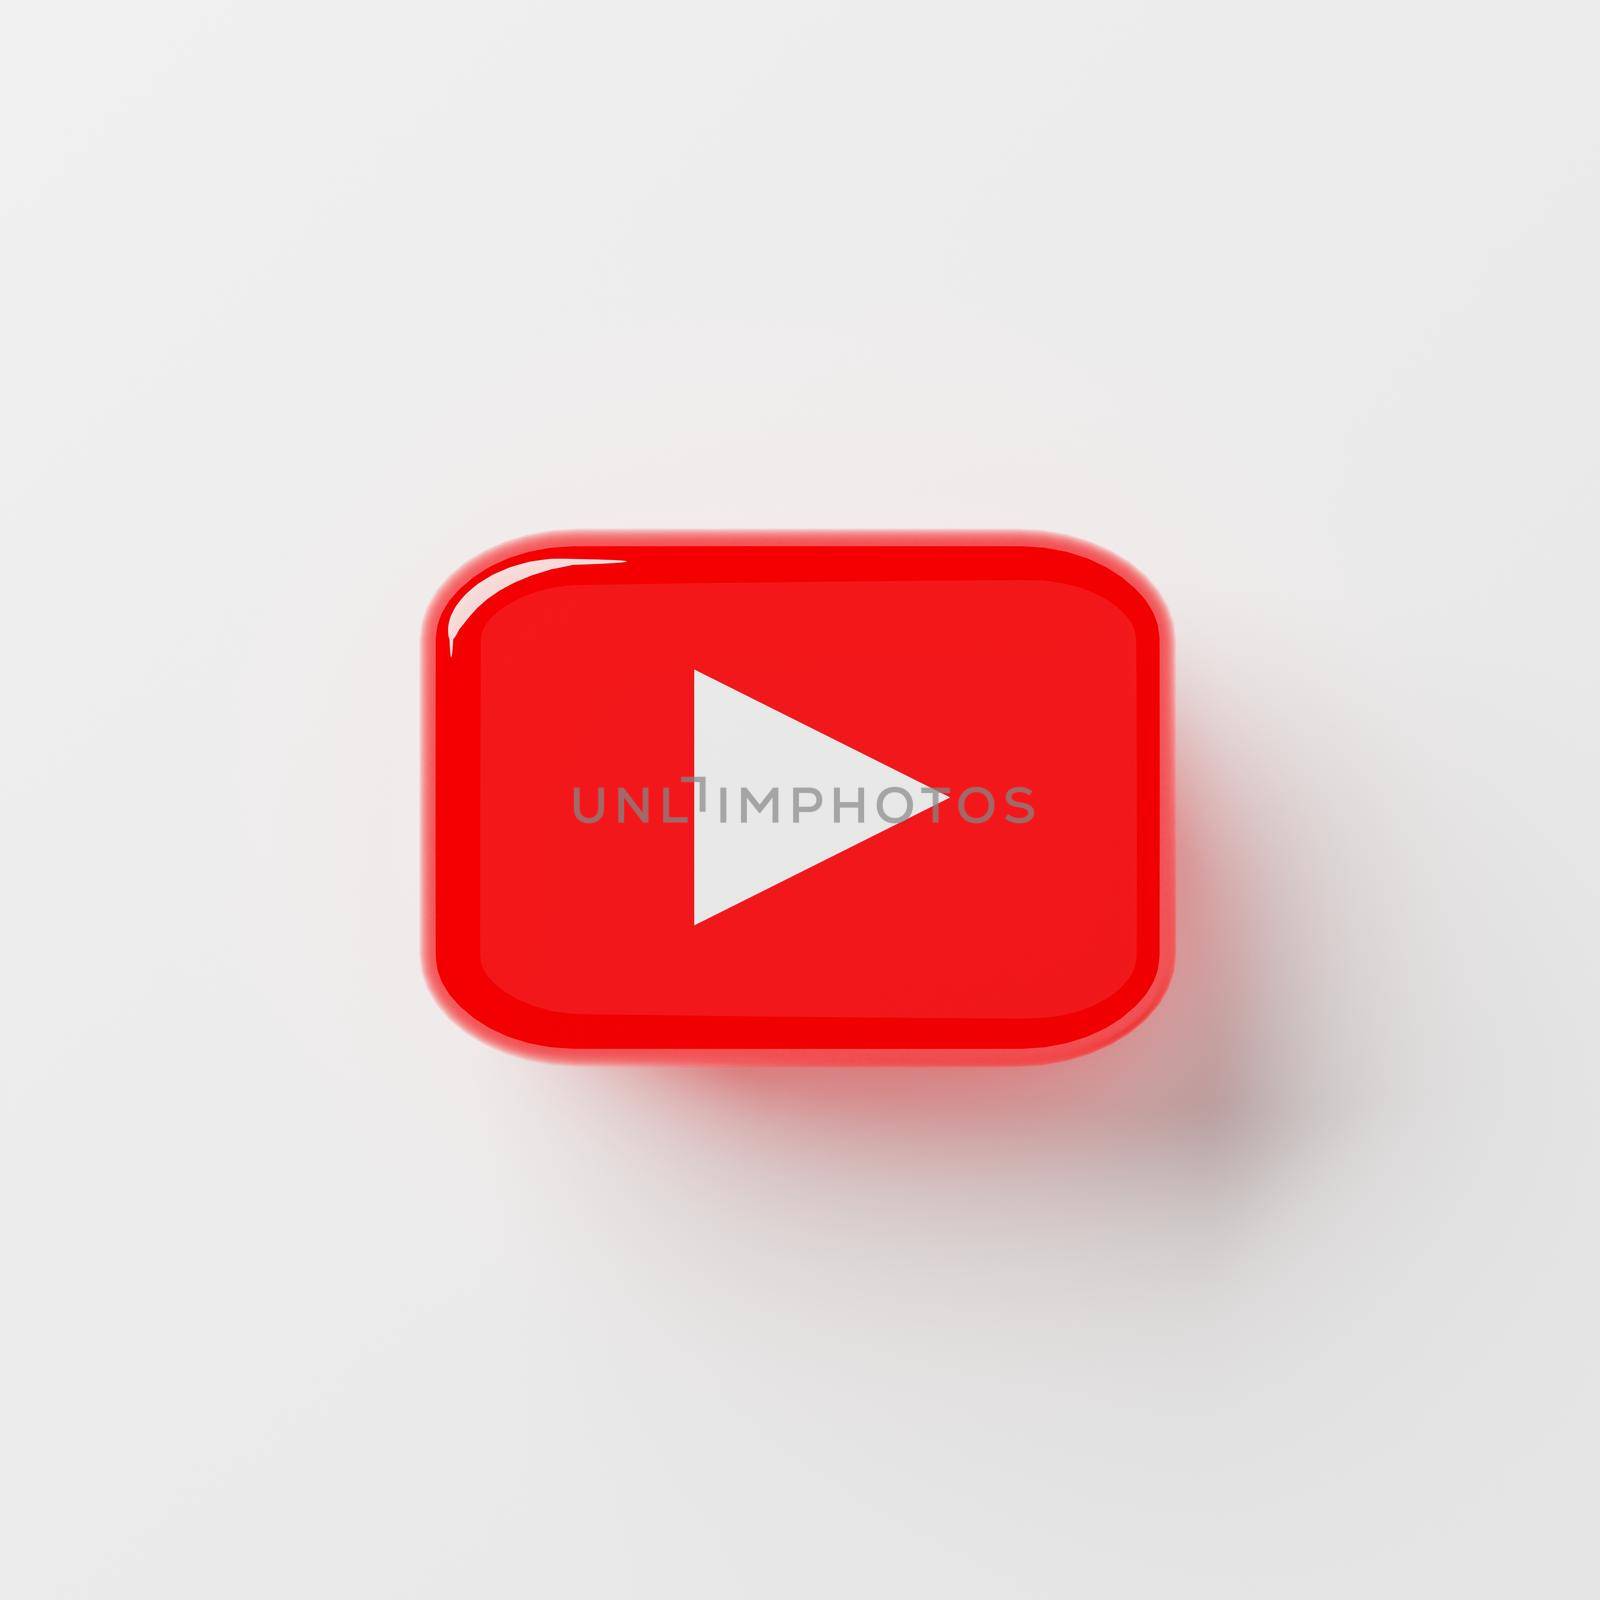 Chonburi, Thailand - Oct 27, 2021: A close up Youtube logo icon on isolated white background. Youtube is largest video sharing website in the world, shallow depth of field. 3D illustration rendering